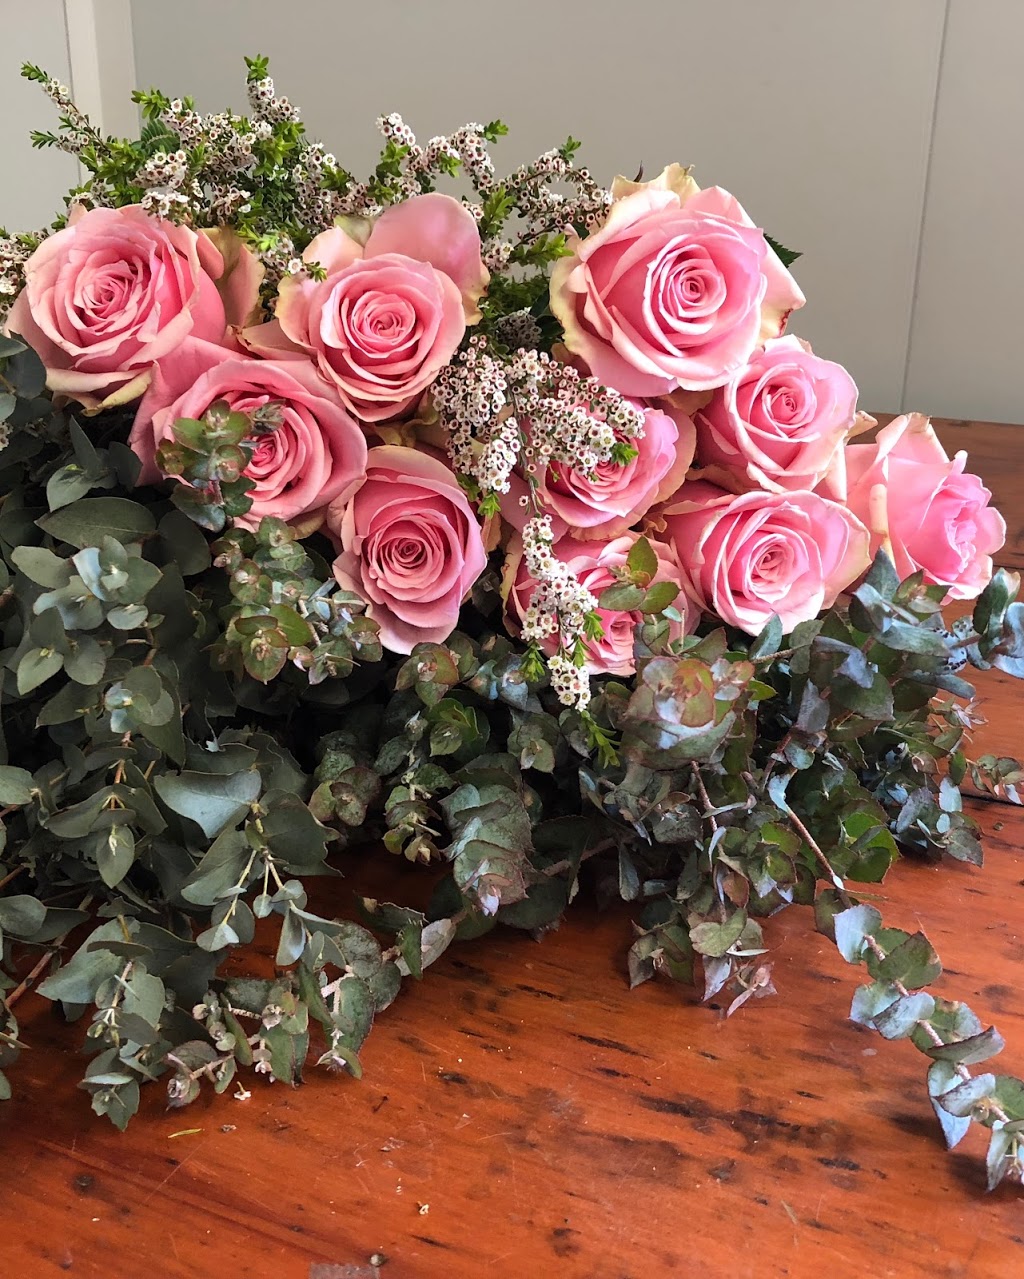 The Luxe Bloom | florist | 10188 New England Hwy, Cabarlah QLD 4352, Australia | 0448968855 OR +61 448 968 855